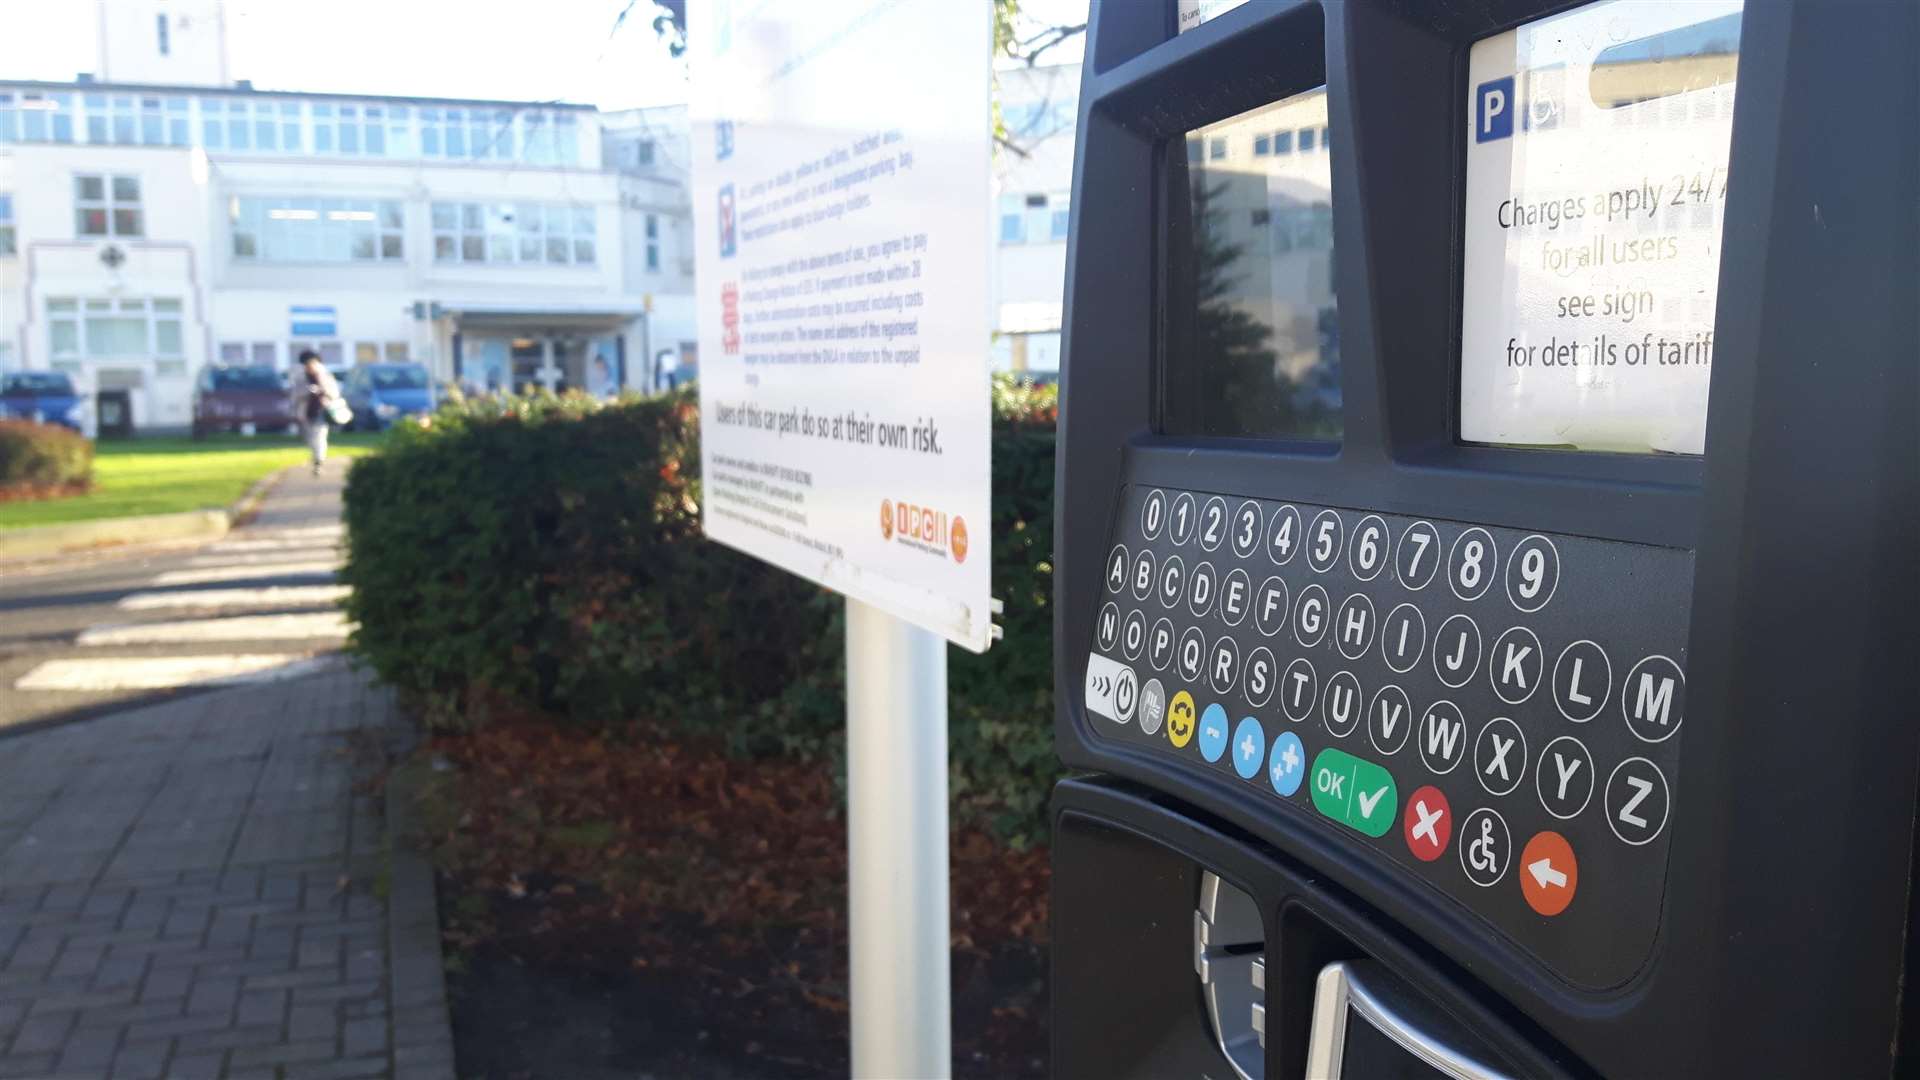 Parking at hospital could cost you a maximum of £10